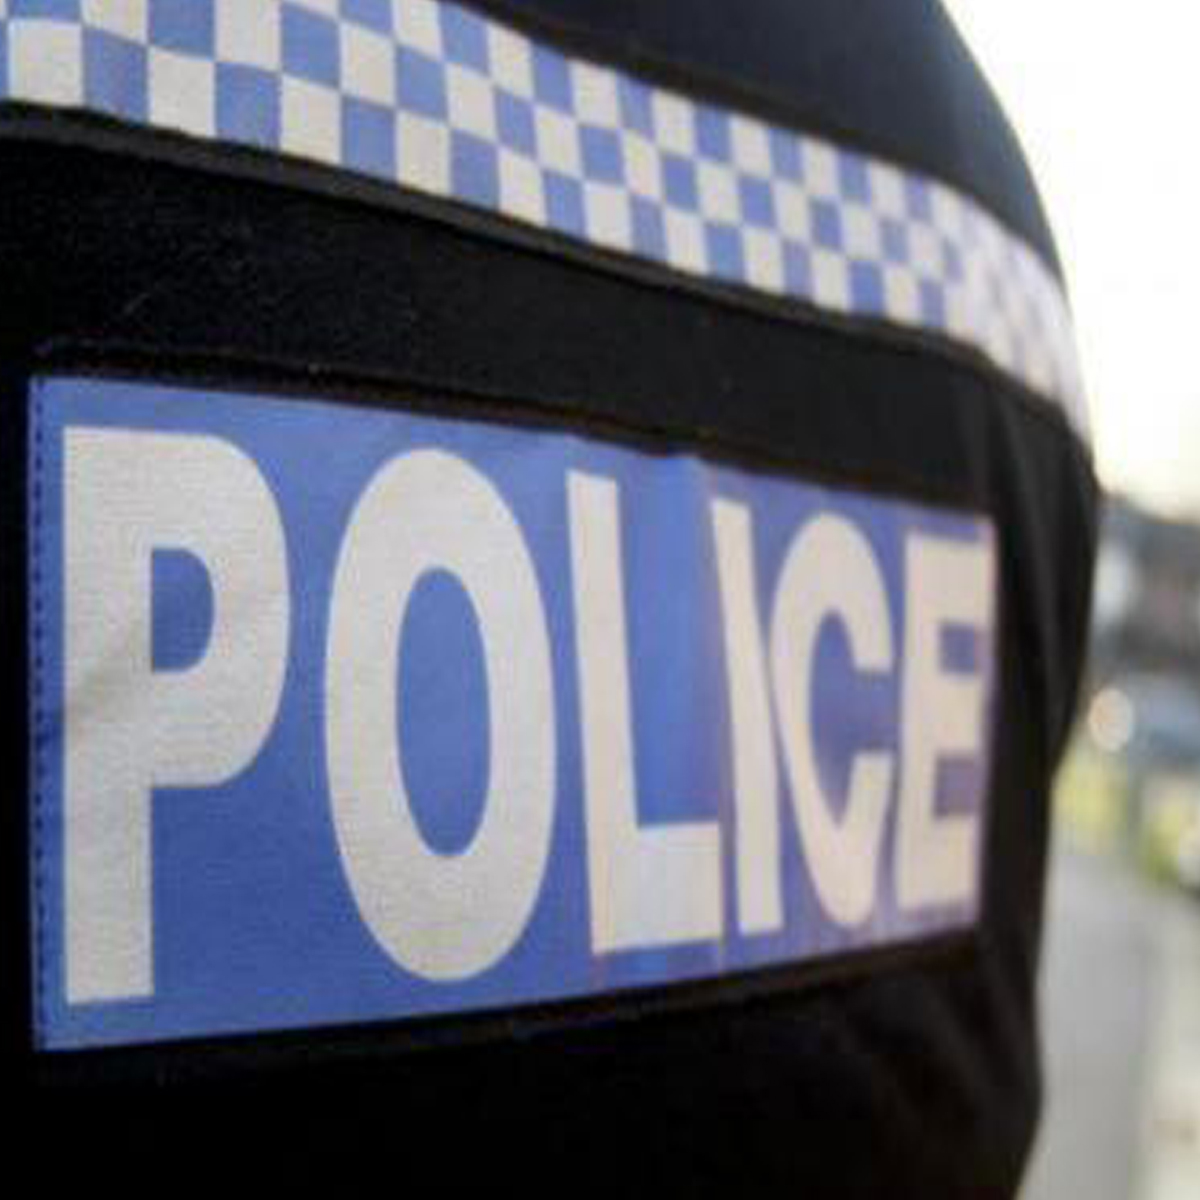 Police issued appeal over assault in Bradford